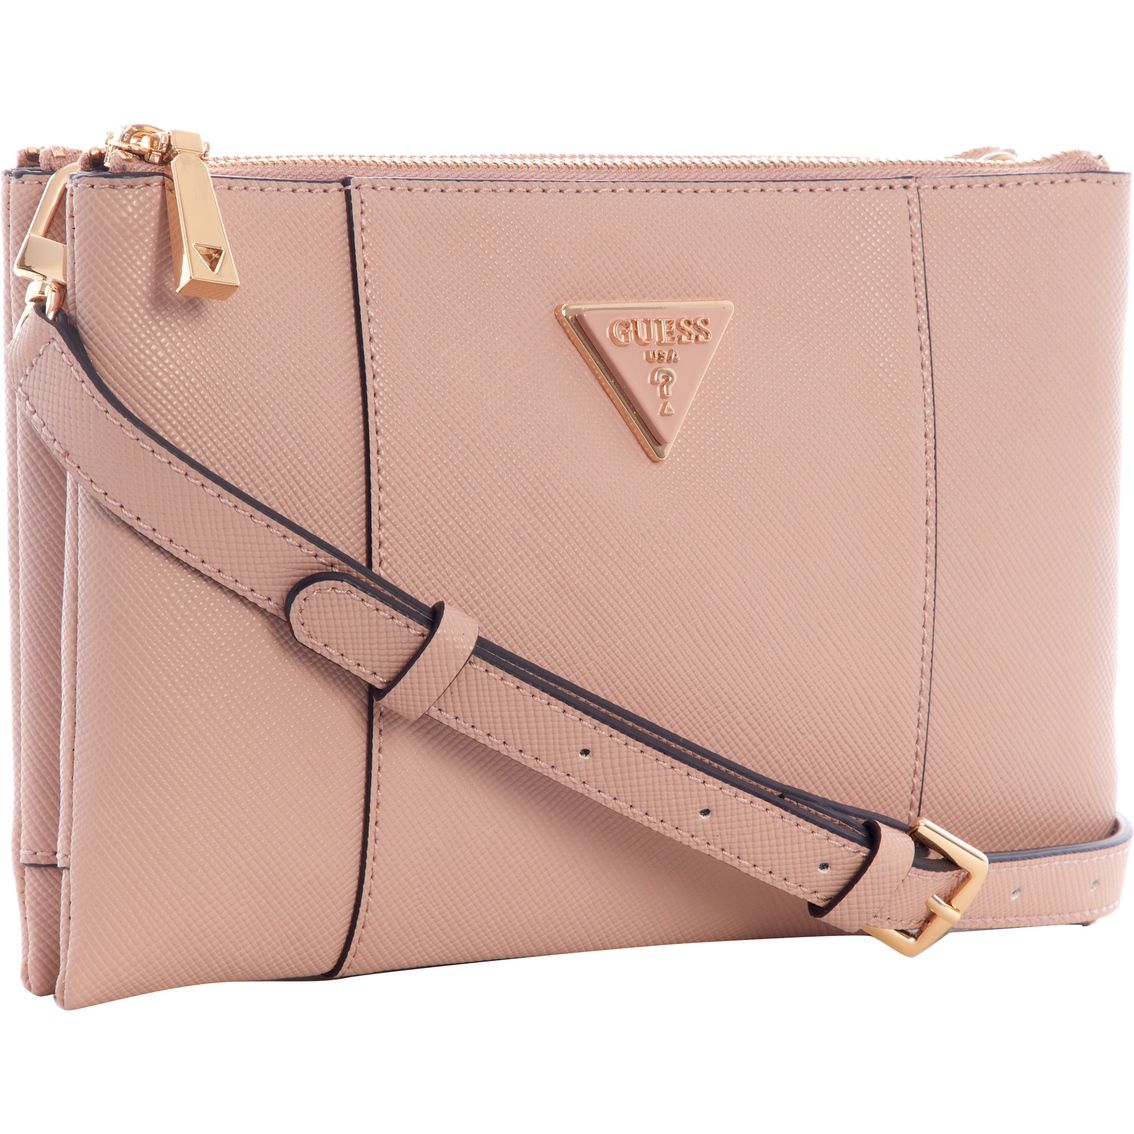 Guess Noelle Crossbody - Image 2 of 3